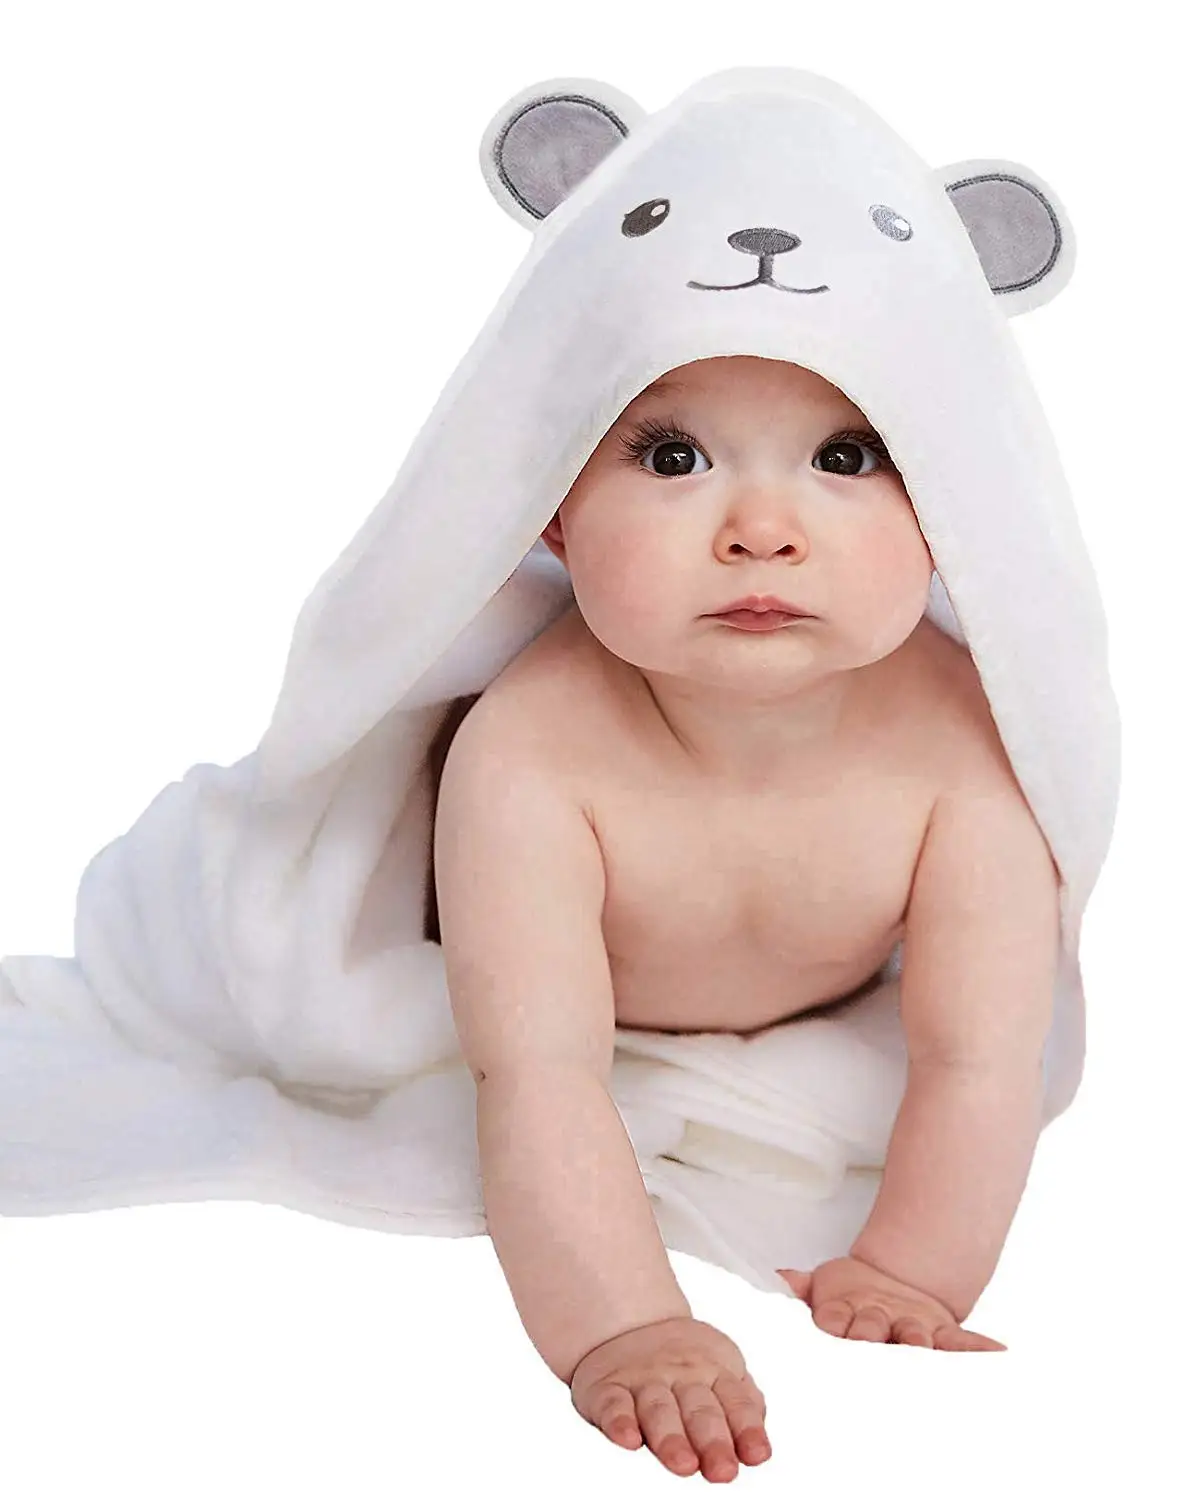 Style 1, Blue Elephant Sviuse Baby Cotton Hooded Towel Animal Face for Toddlers Ultra Soft Super Absorbent Thick Cute Ear Design Perfect Baby Shower for Boys or Girls Kid Bath Towel One Size 